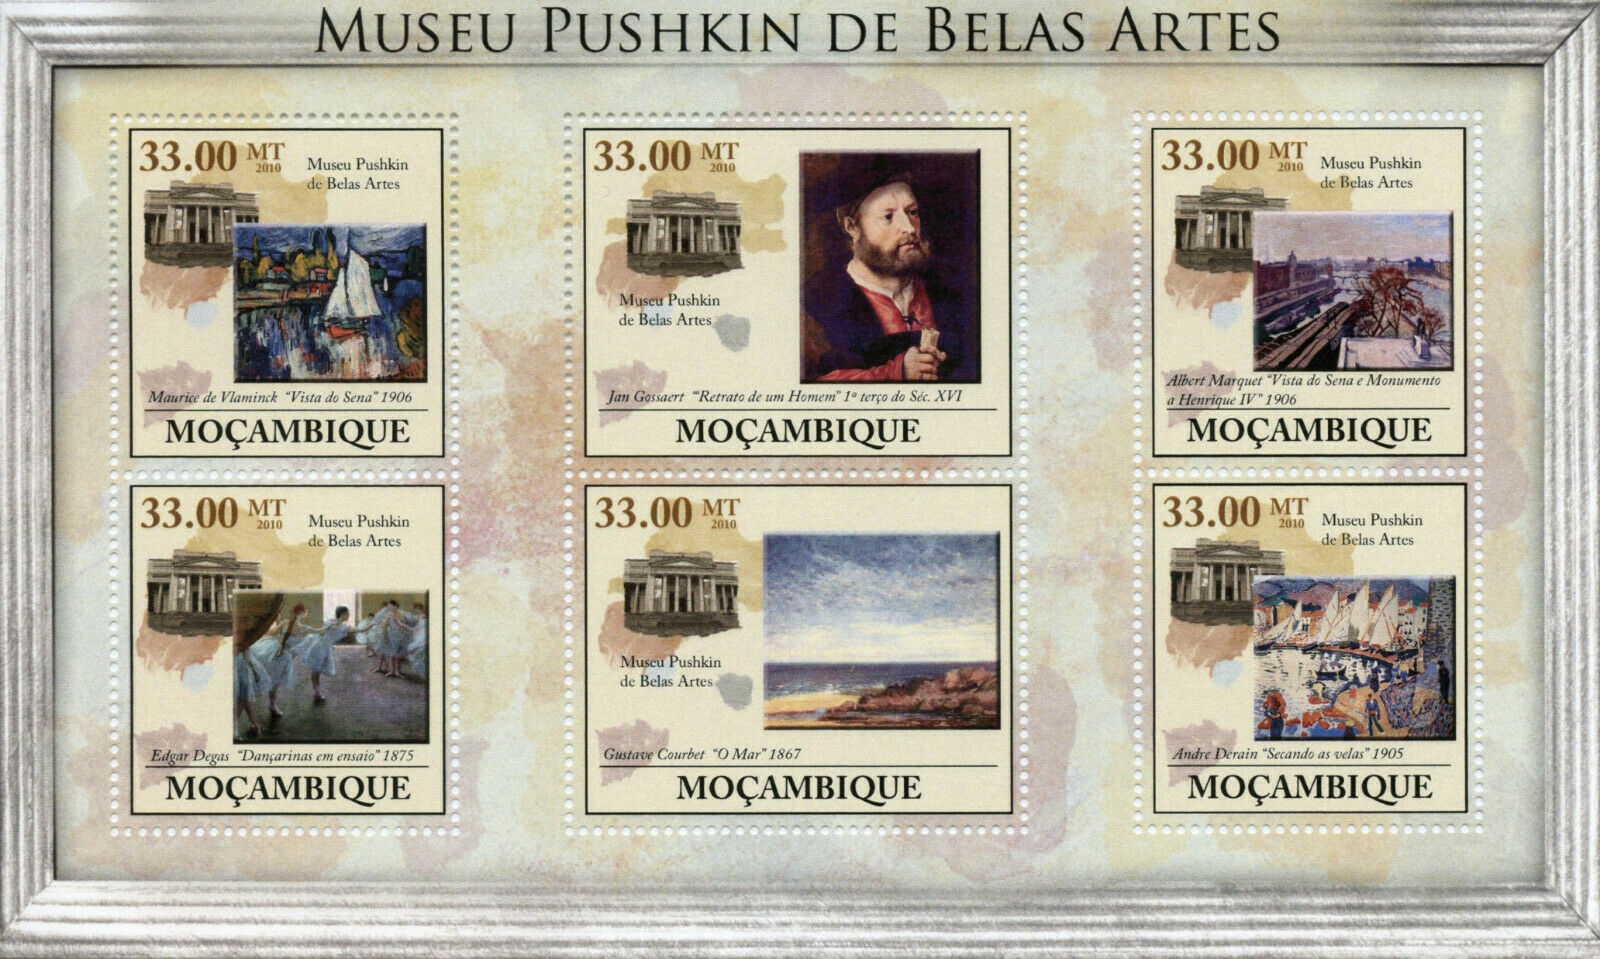 Mozambique Art Stamps 2010 MNH Pushkin State Museum of Fine Arts Degas 6v M/S